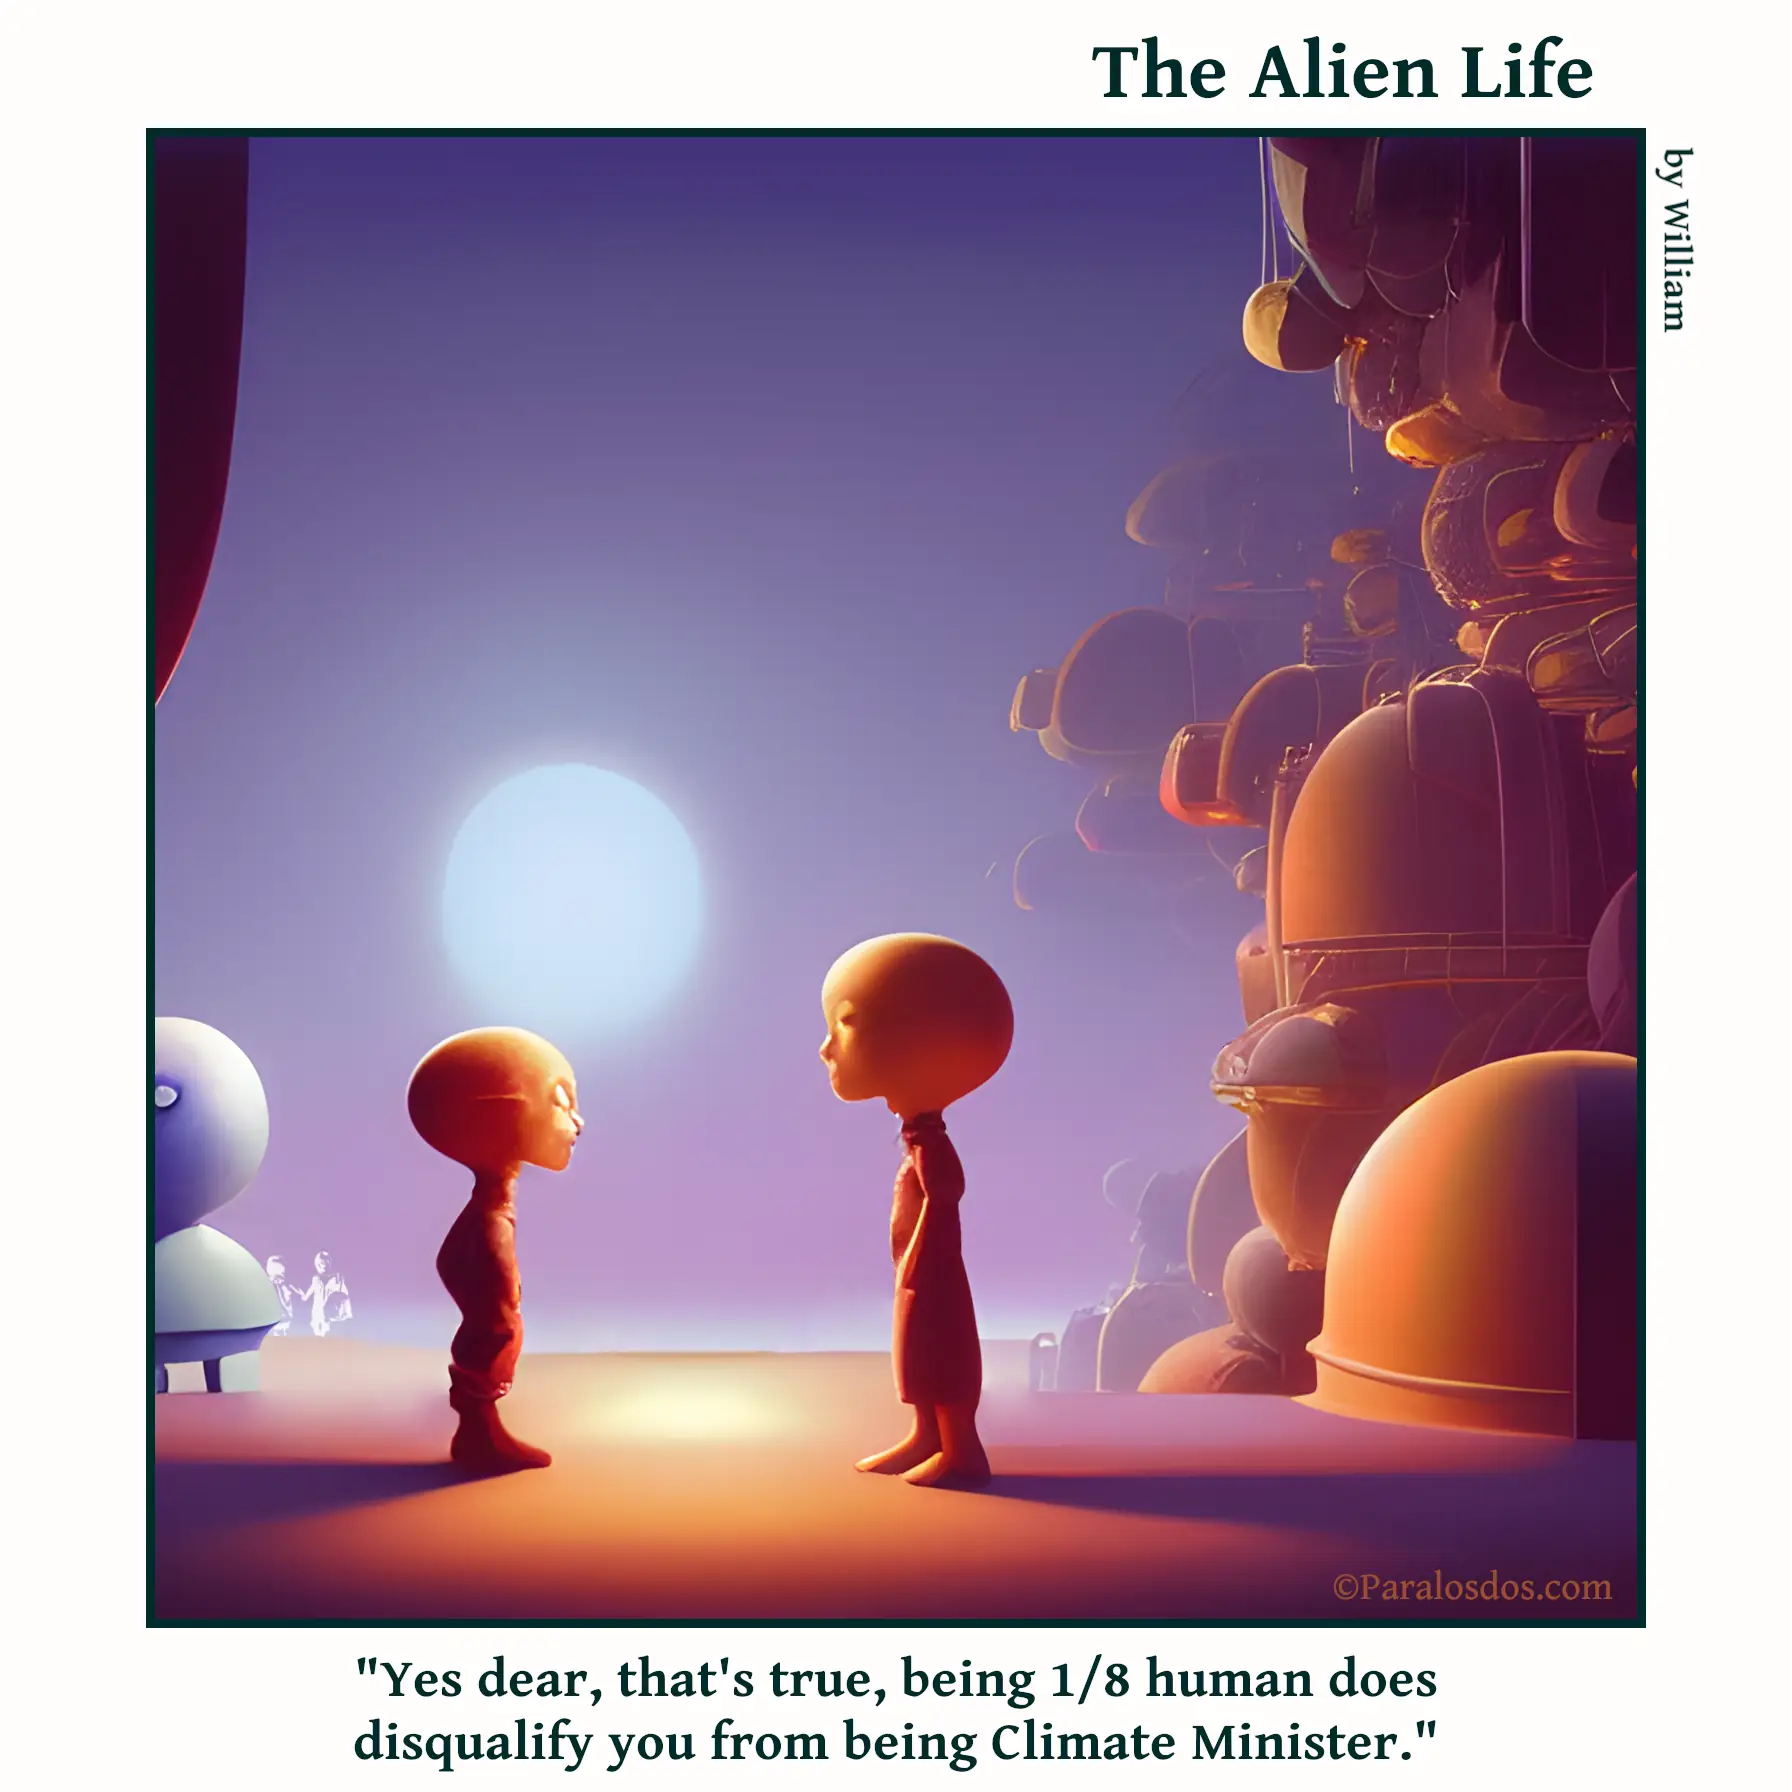 The Alien Life, one panel Comic. An alien child is standing in front of his alien mother. The caption reads: "Yes dear, that's true, being 1/8 human does disqualify you from being Climate Minister."